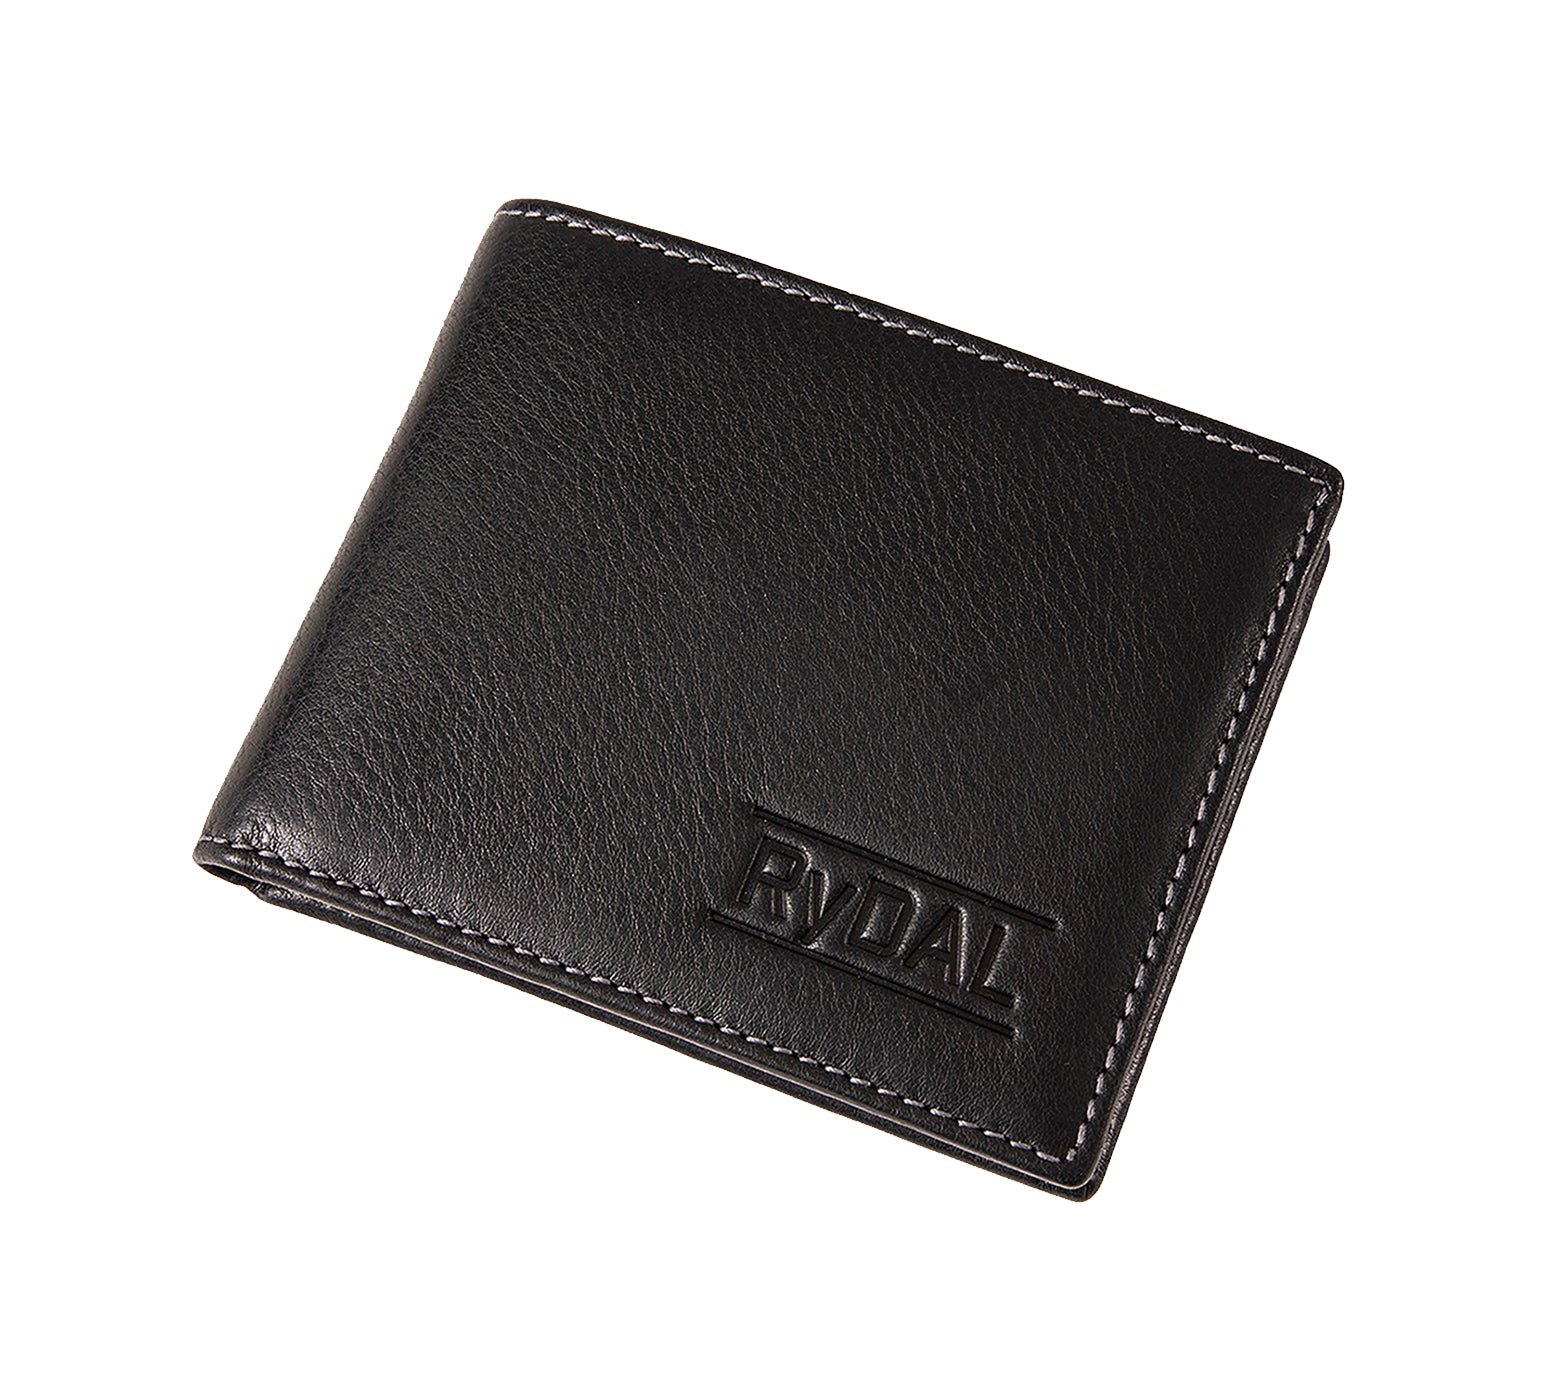 Mens Leather Wallet with Coin Pocket from Rydal in 'Black/Grey' showing wallet closed.